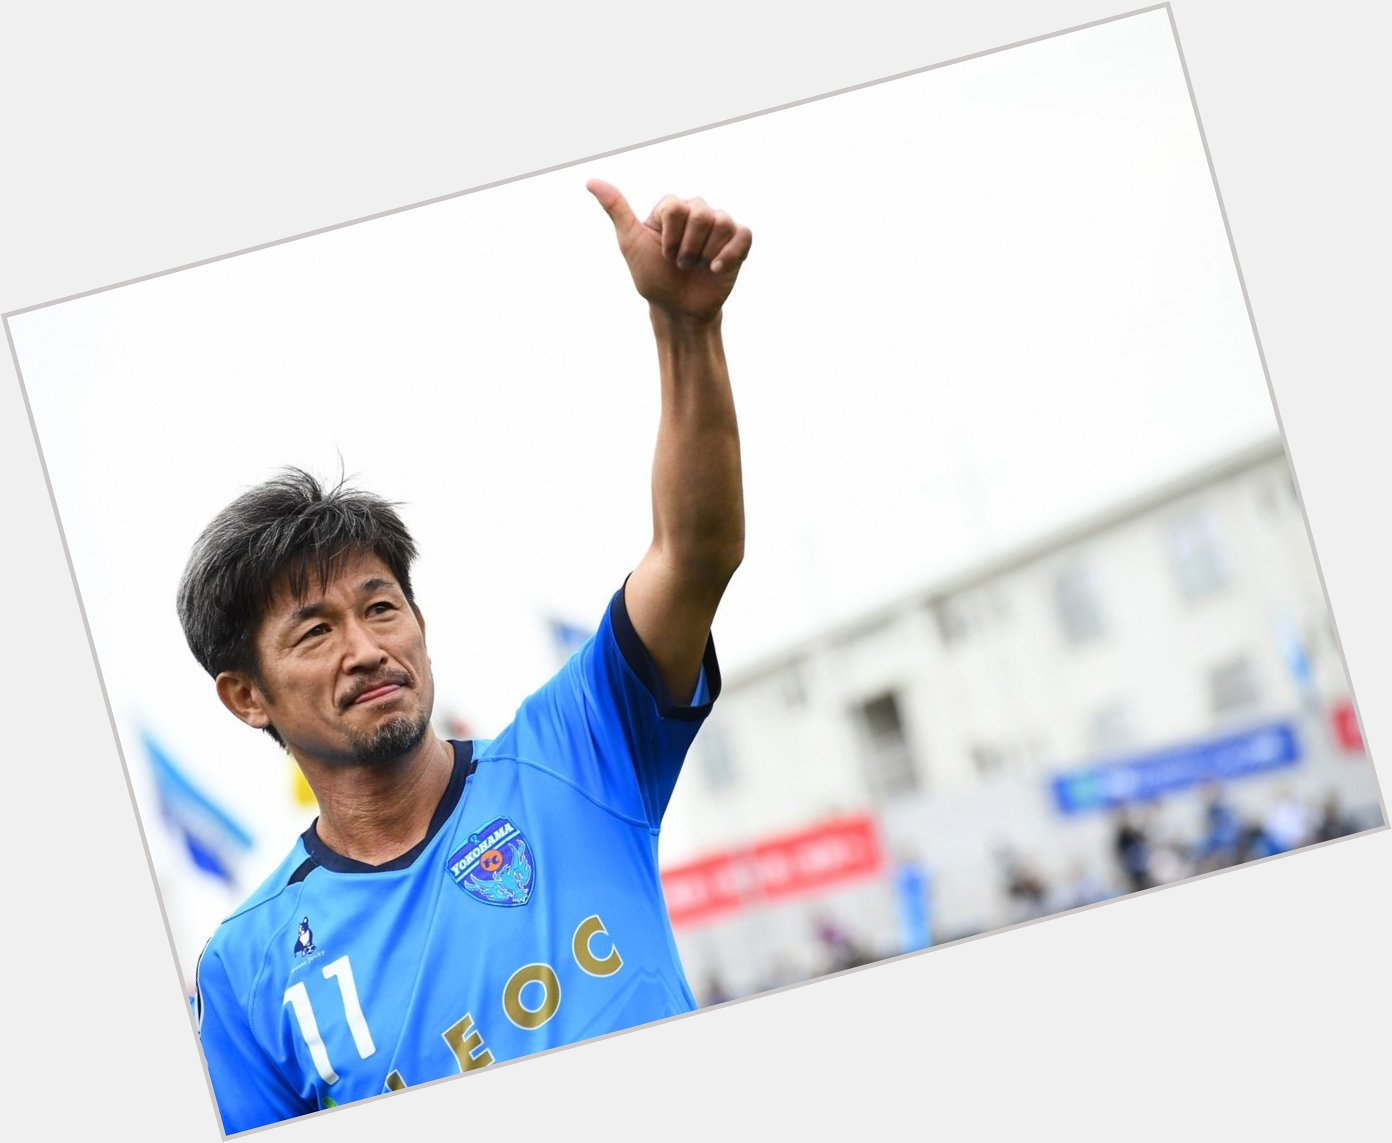 Happy 54th birthday to Kazuyoshi Miura, may you keep on balling What age do you think he\ll retire at? 